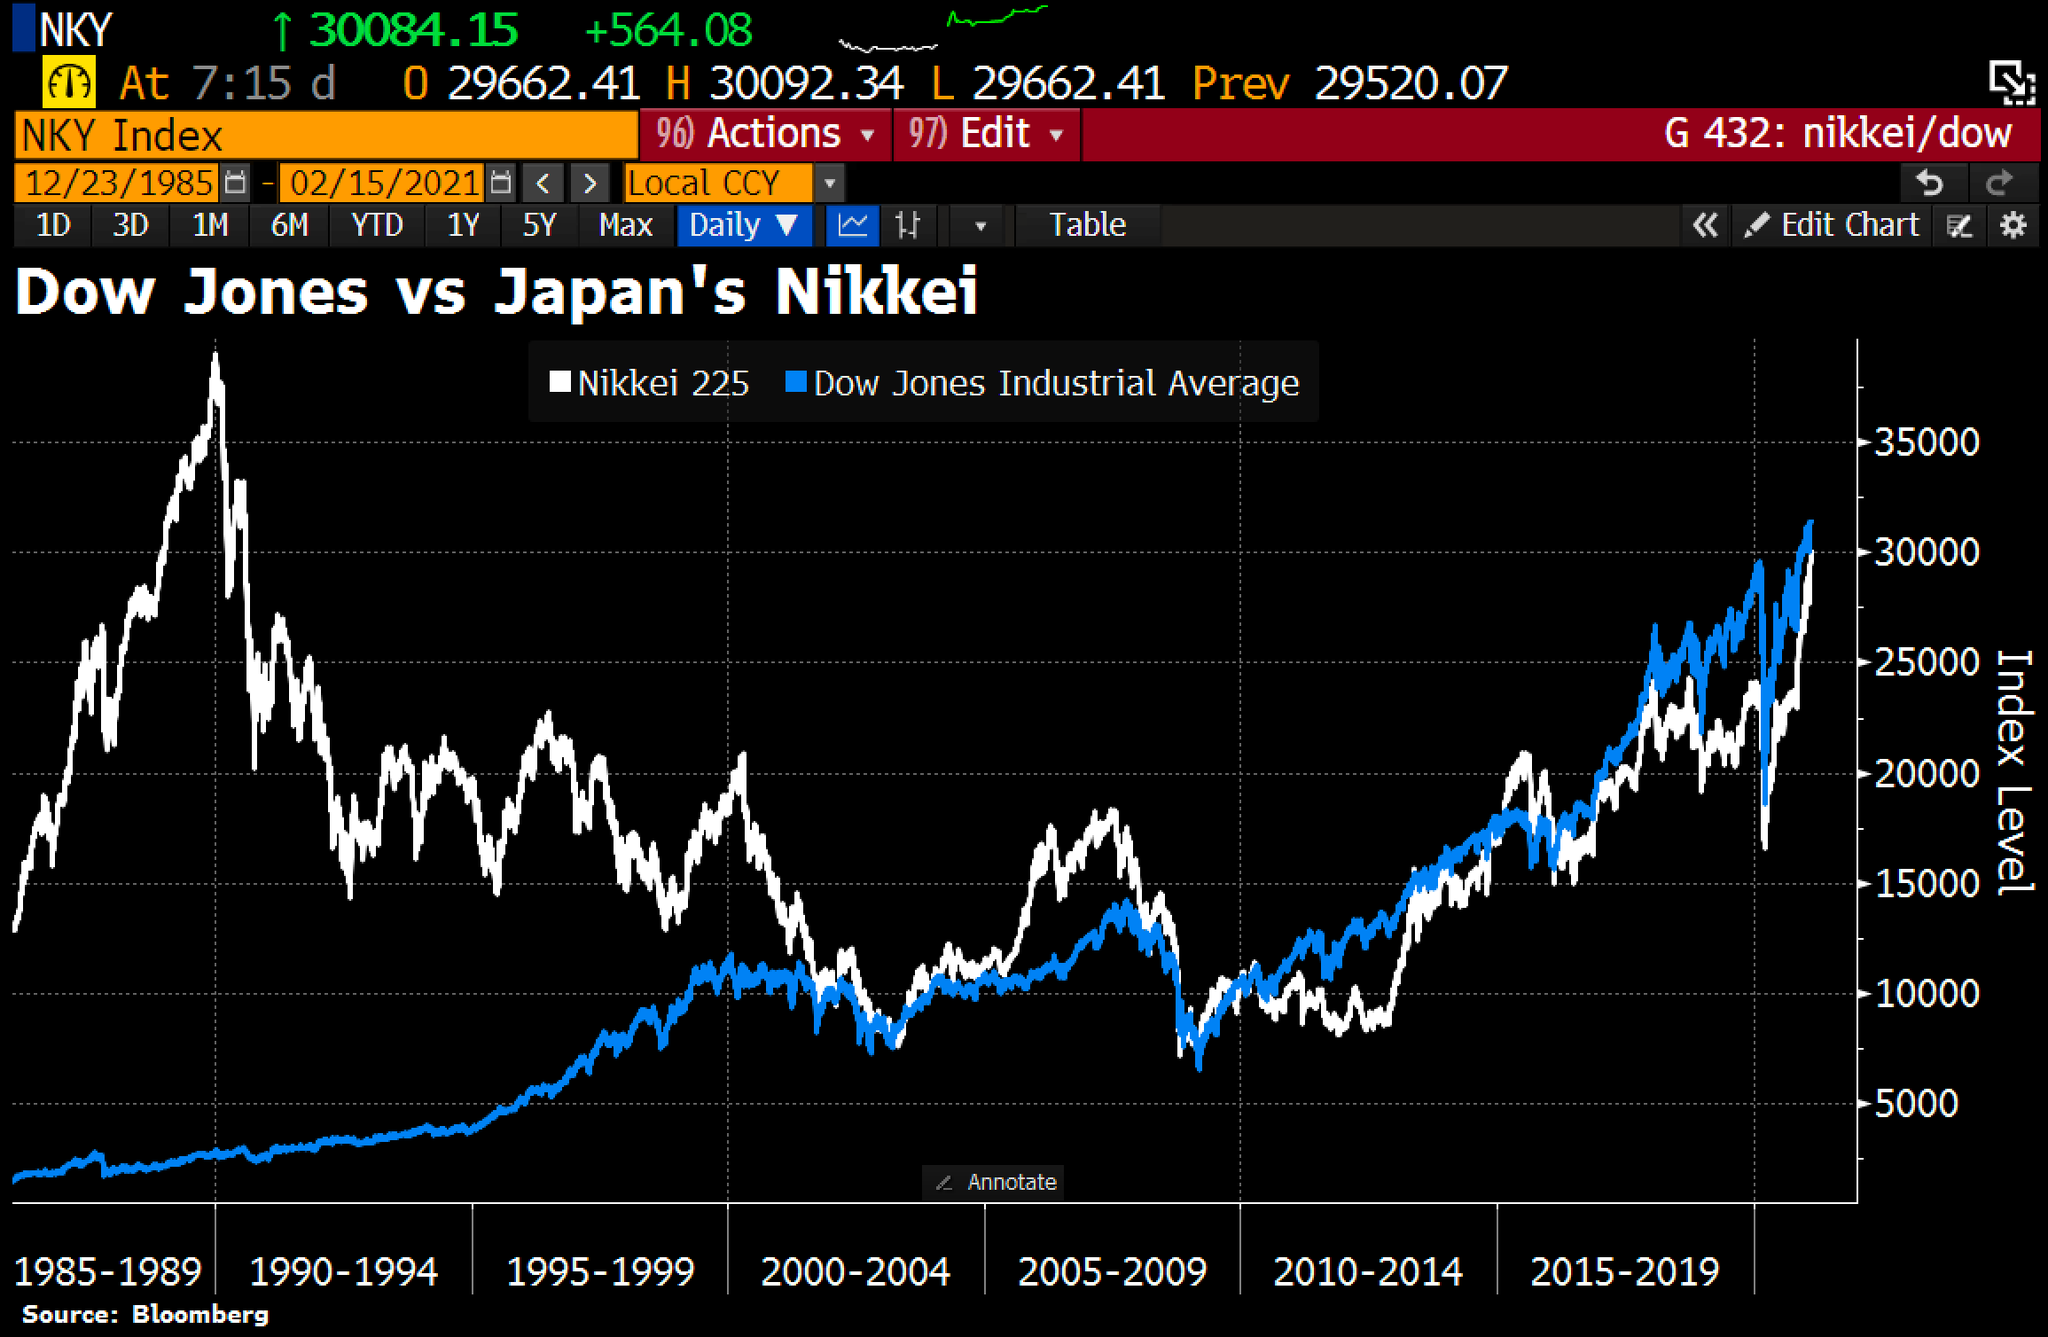 Compare & contrast: 30 years of the Dow vs. Nikkei